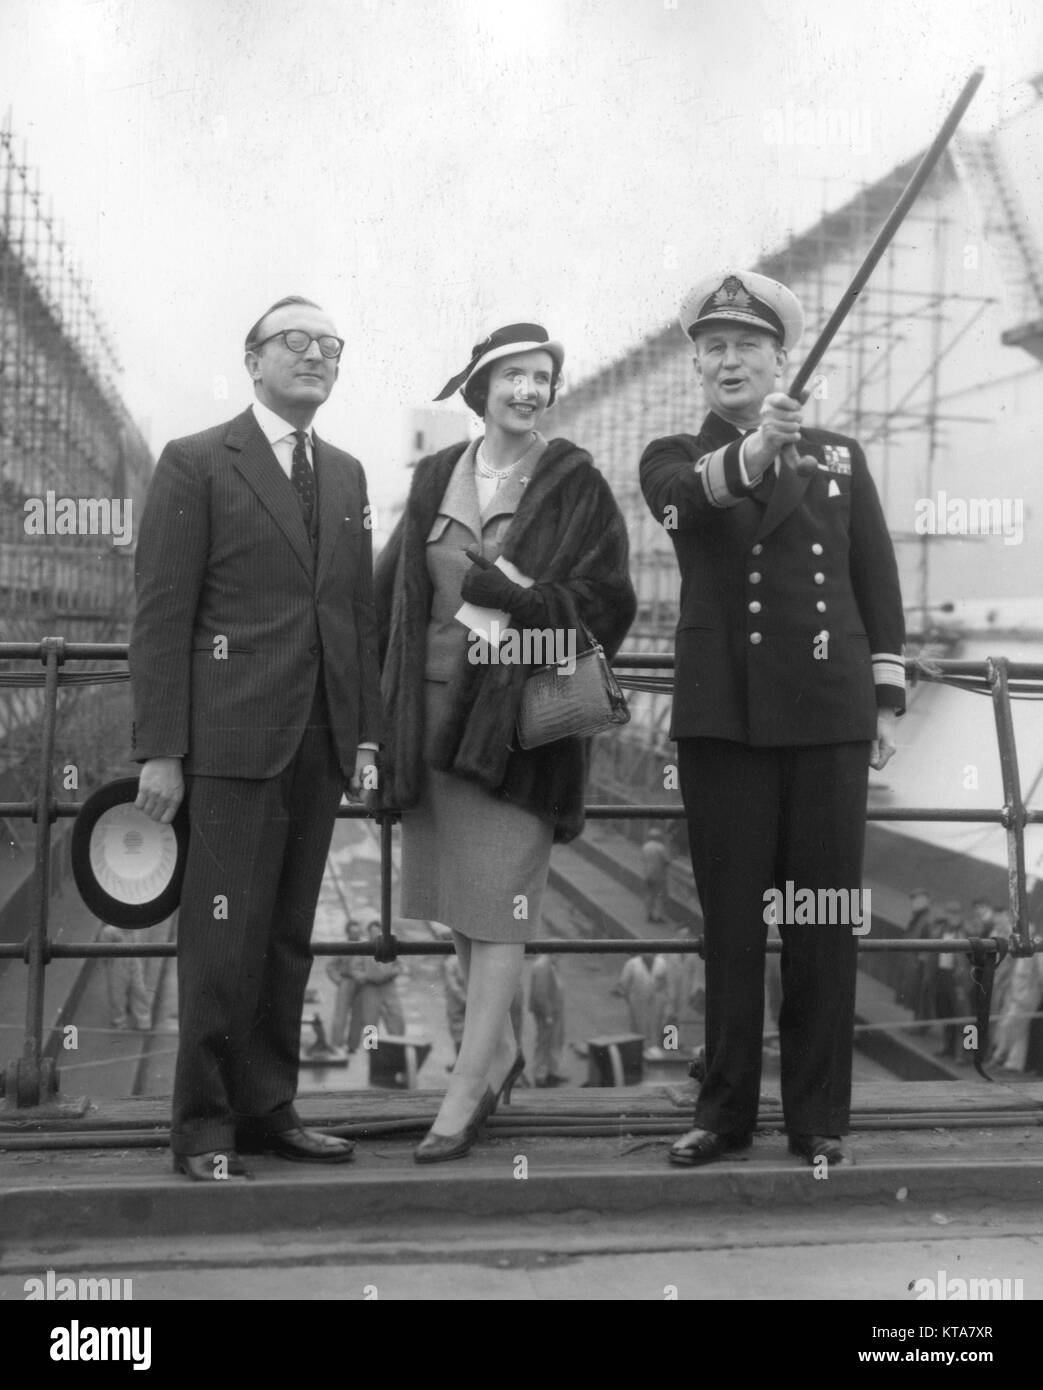 Lord Carrington, First Lord of the Admiralty, and Lady Carrington with Rear-Admiral J.H. Unwin (with stick), Adirmal Superintendent of Portsmouth Dockyard, inspect Admiralty Floating Dock No.59, which was launched by Lady Carrington in the dockyard earlier in the day. *Neg corrupt. Contact scanned Stock Photo